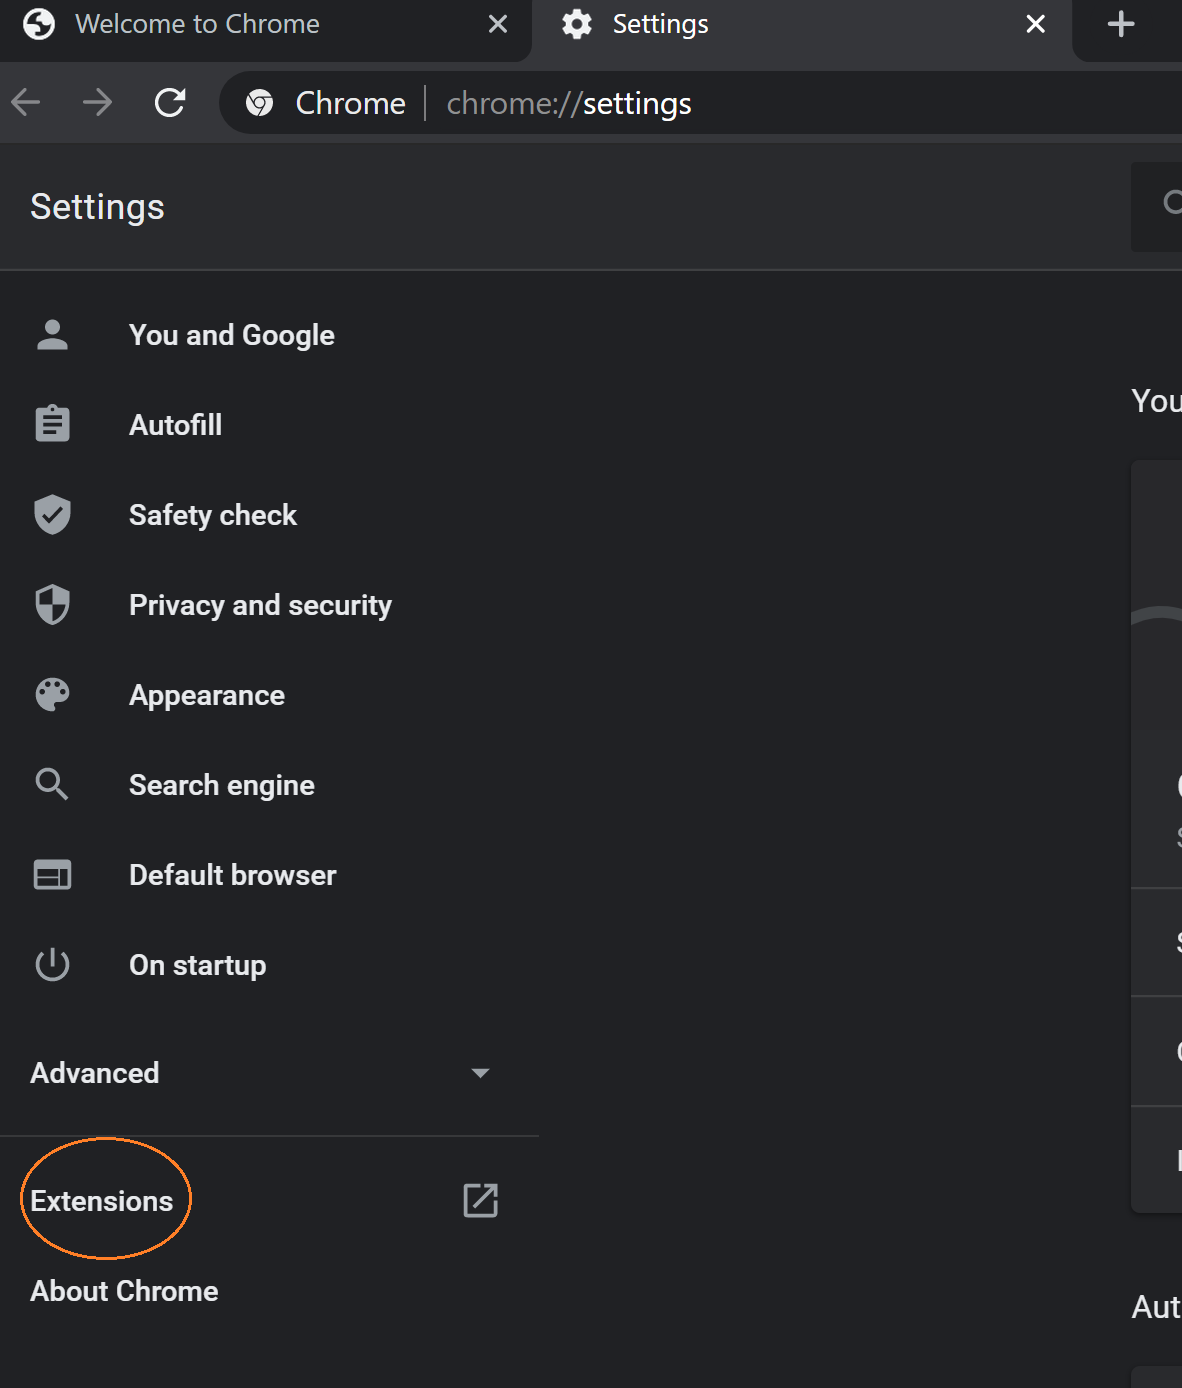 Chrome settings menu with extentions highlighted